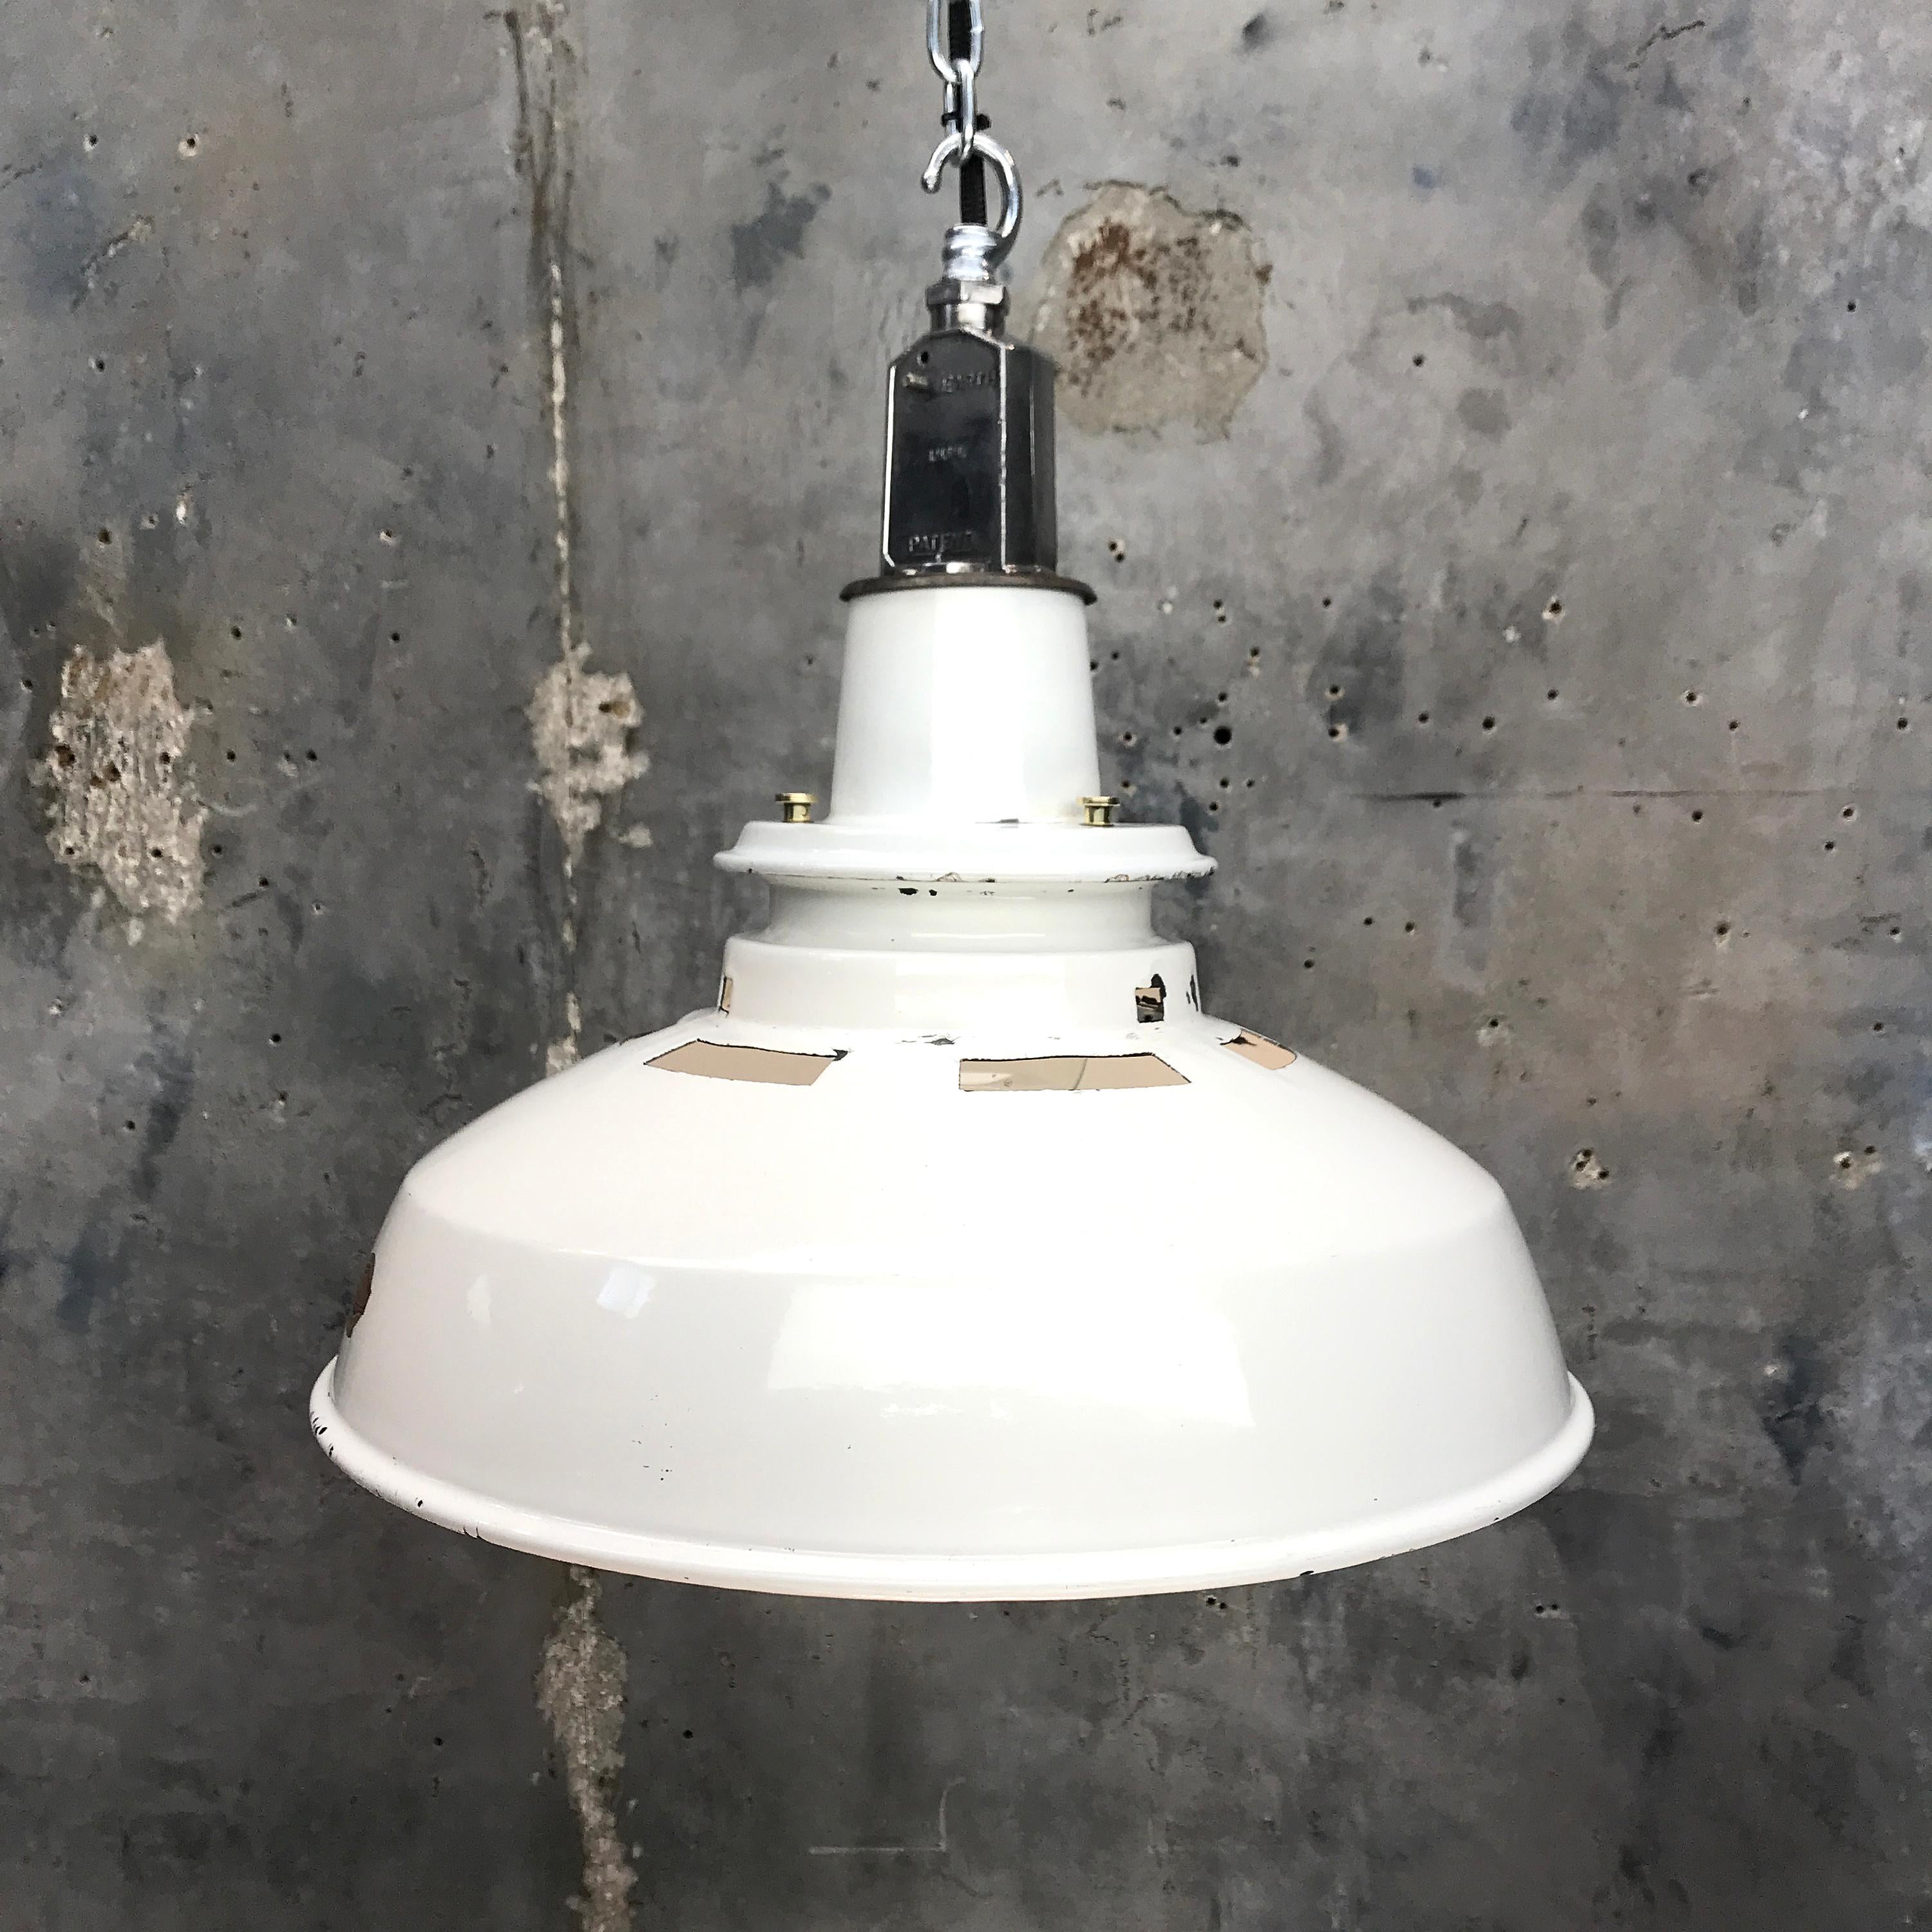 Original reclaimed white enamel vintage Thorlux ceiling light factory pendant made in England.

This is a traditional 1930s Thorlux ceiling pendant restored by hand in UK by Loomlight to modern lighting standards.

Supplied and fitted with a